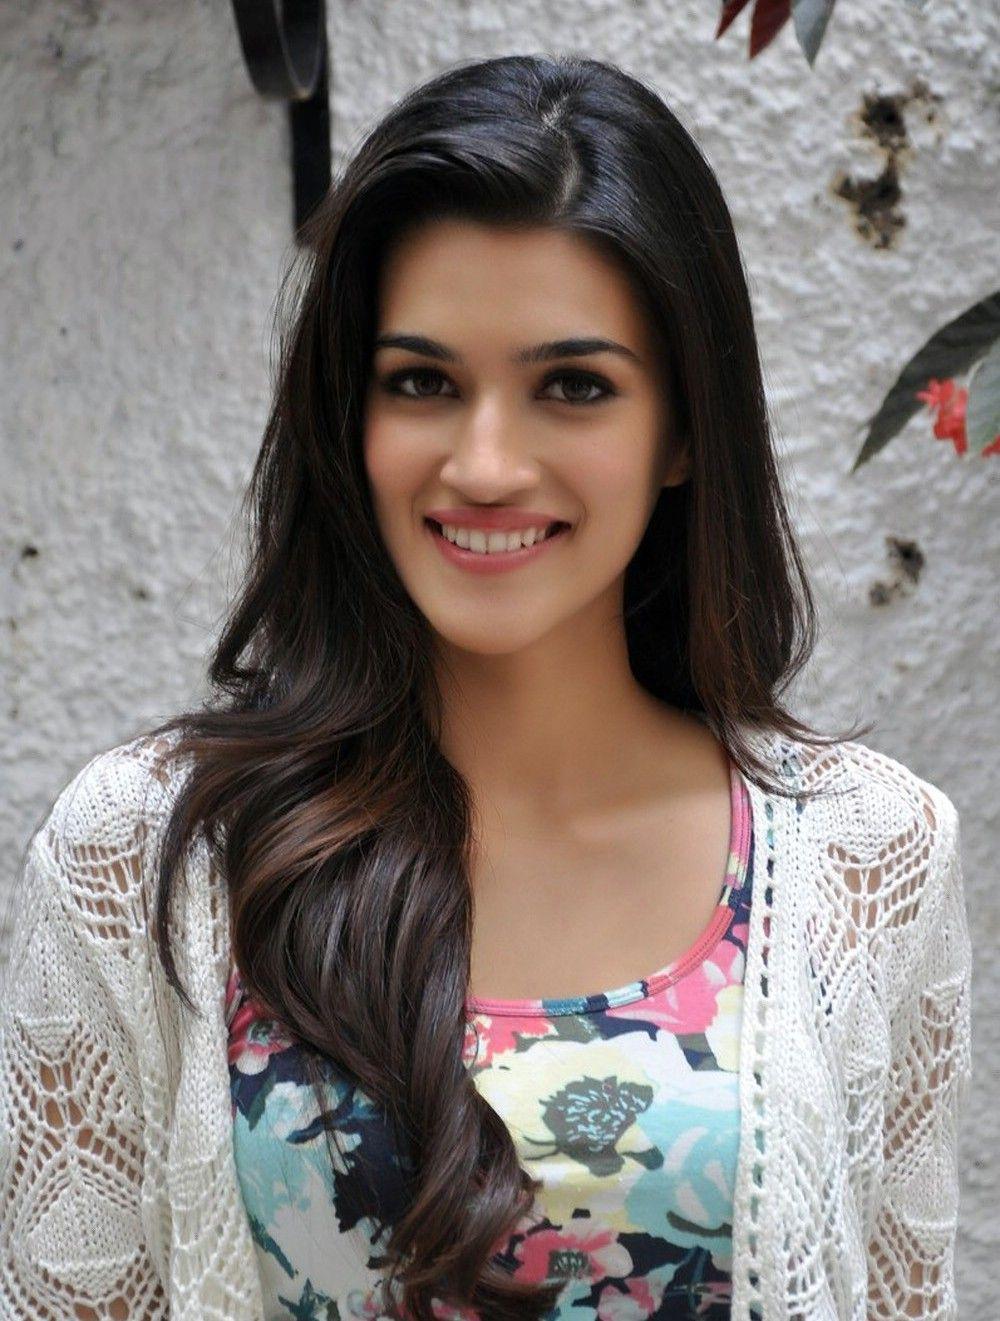 Kriti Sanon Hd Wallpapers In Saree Available Screen Resolutions To Download Are From 1080p To